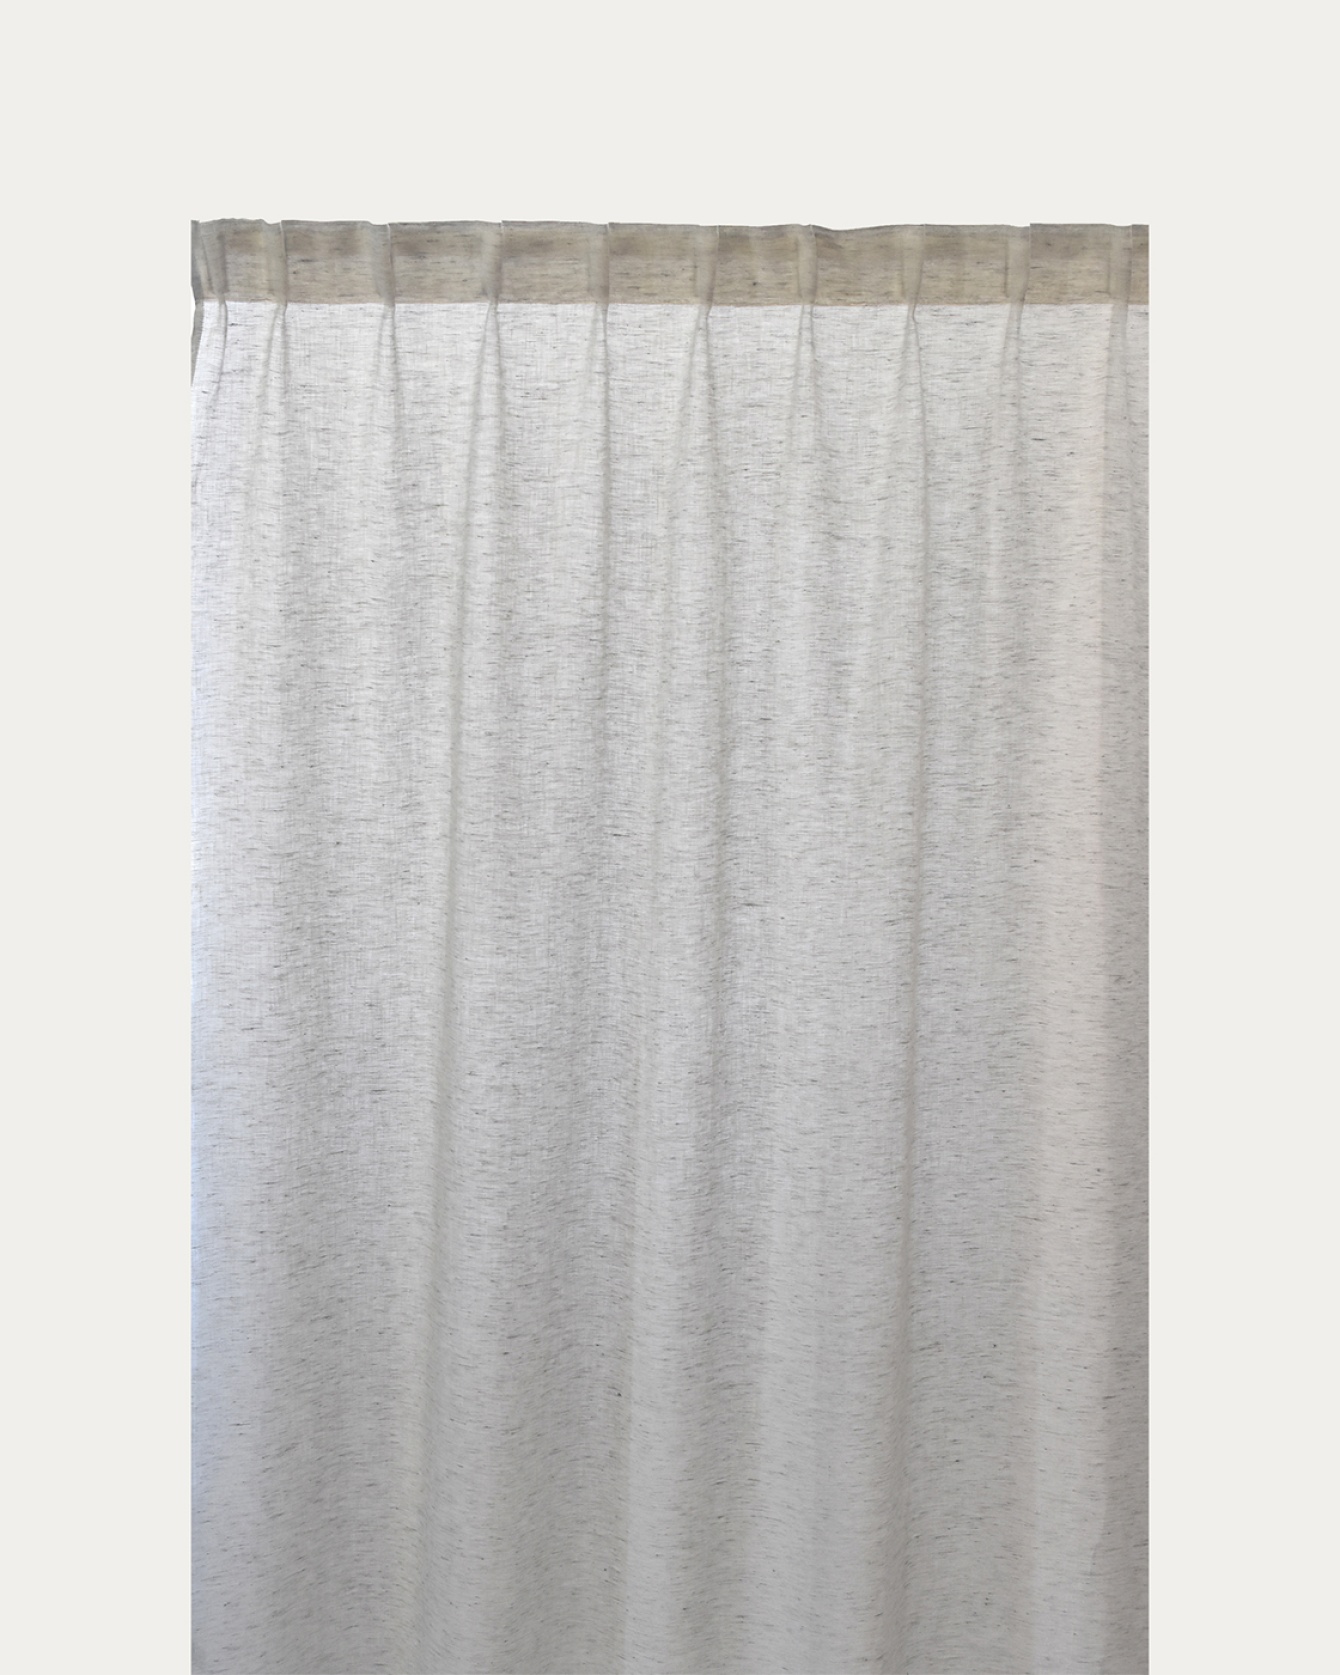 Product image light stone grey INTERMEZZO curtain of sheer linen with finished pleat tape from LINUM DESIGN. Size 140x290 cm and sold in 2-pack.